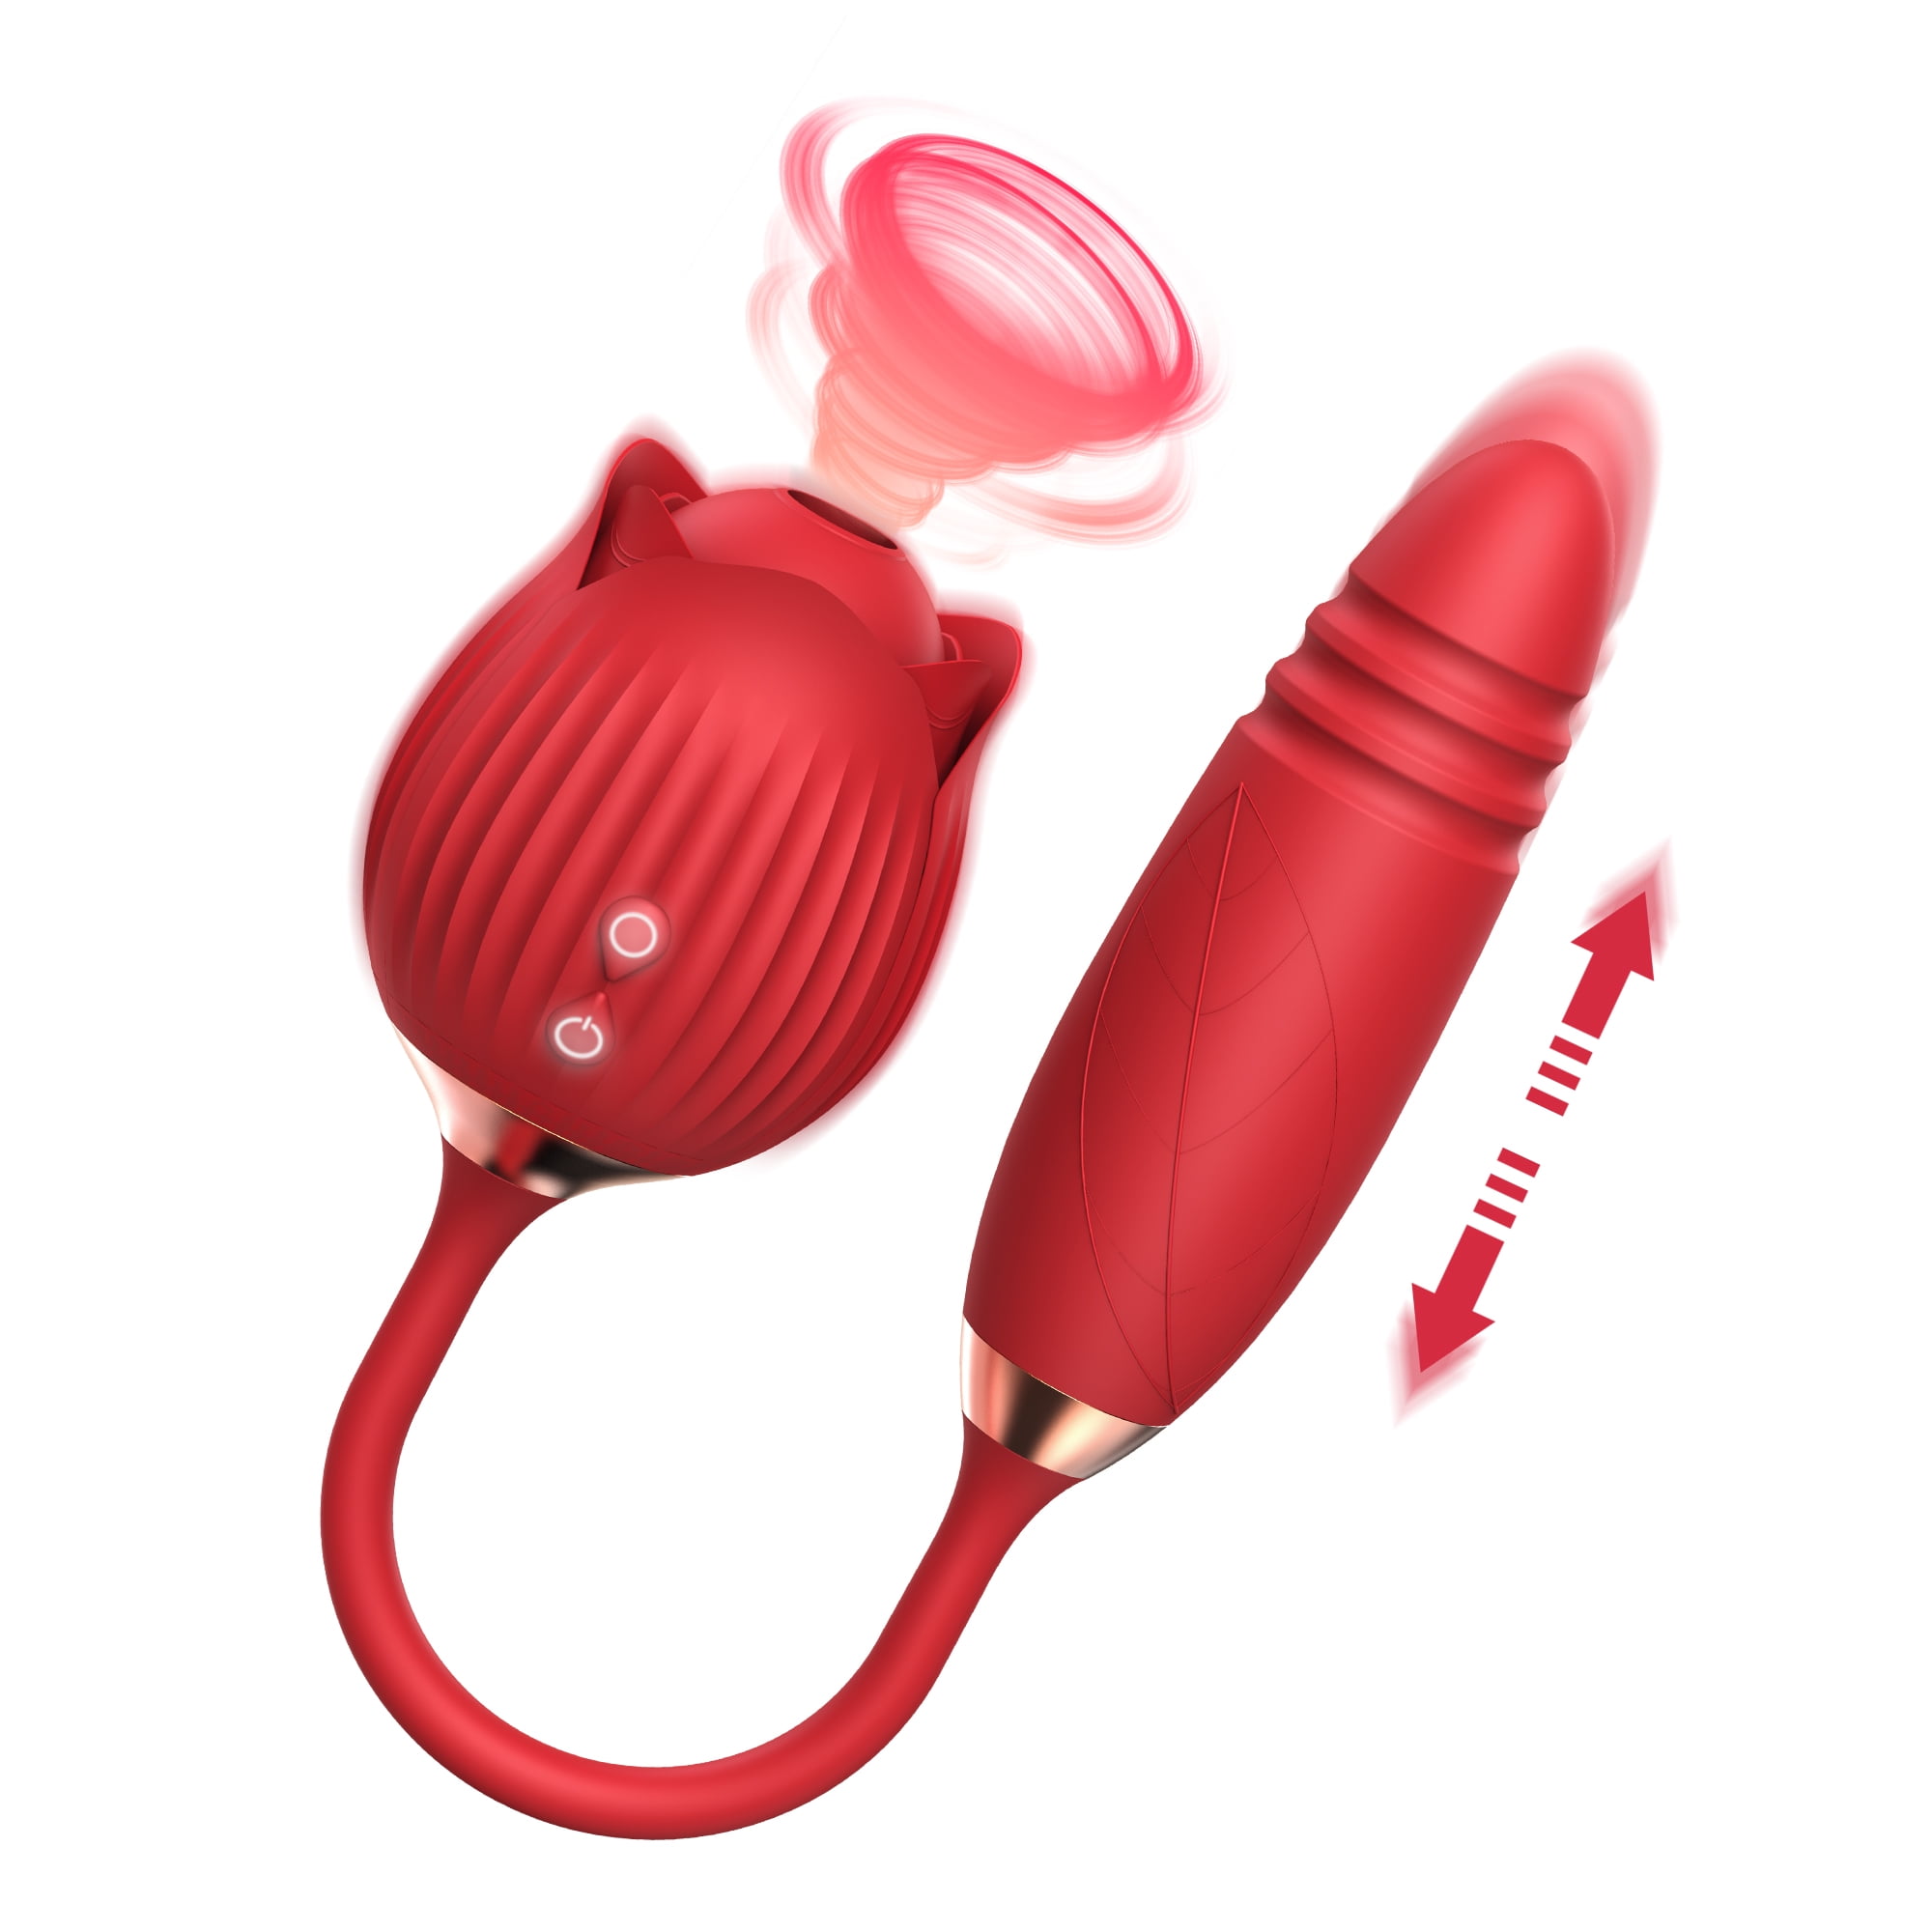 DARZU Rose Toy Vibrator for Women, G Spot Adult Sex Toys with Vibrating Egg  picture